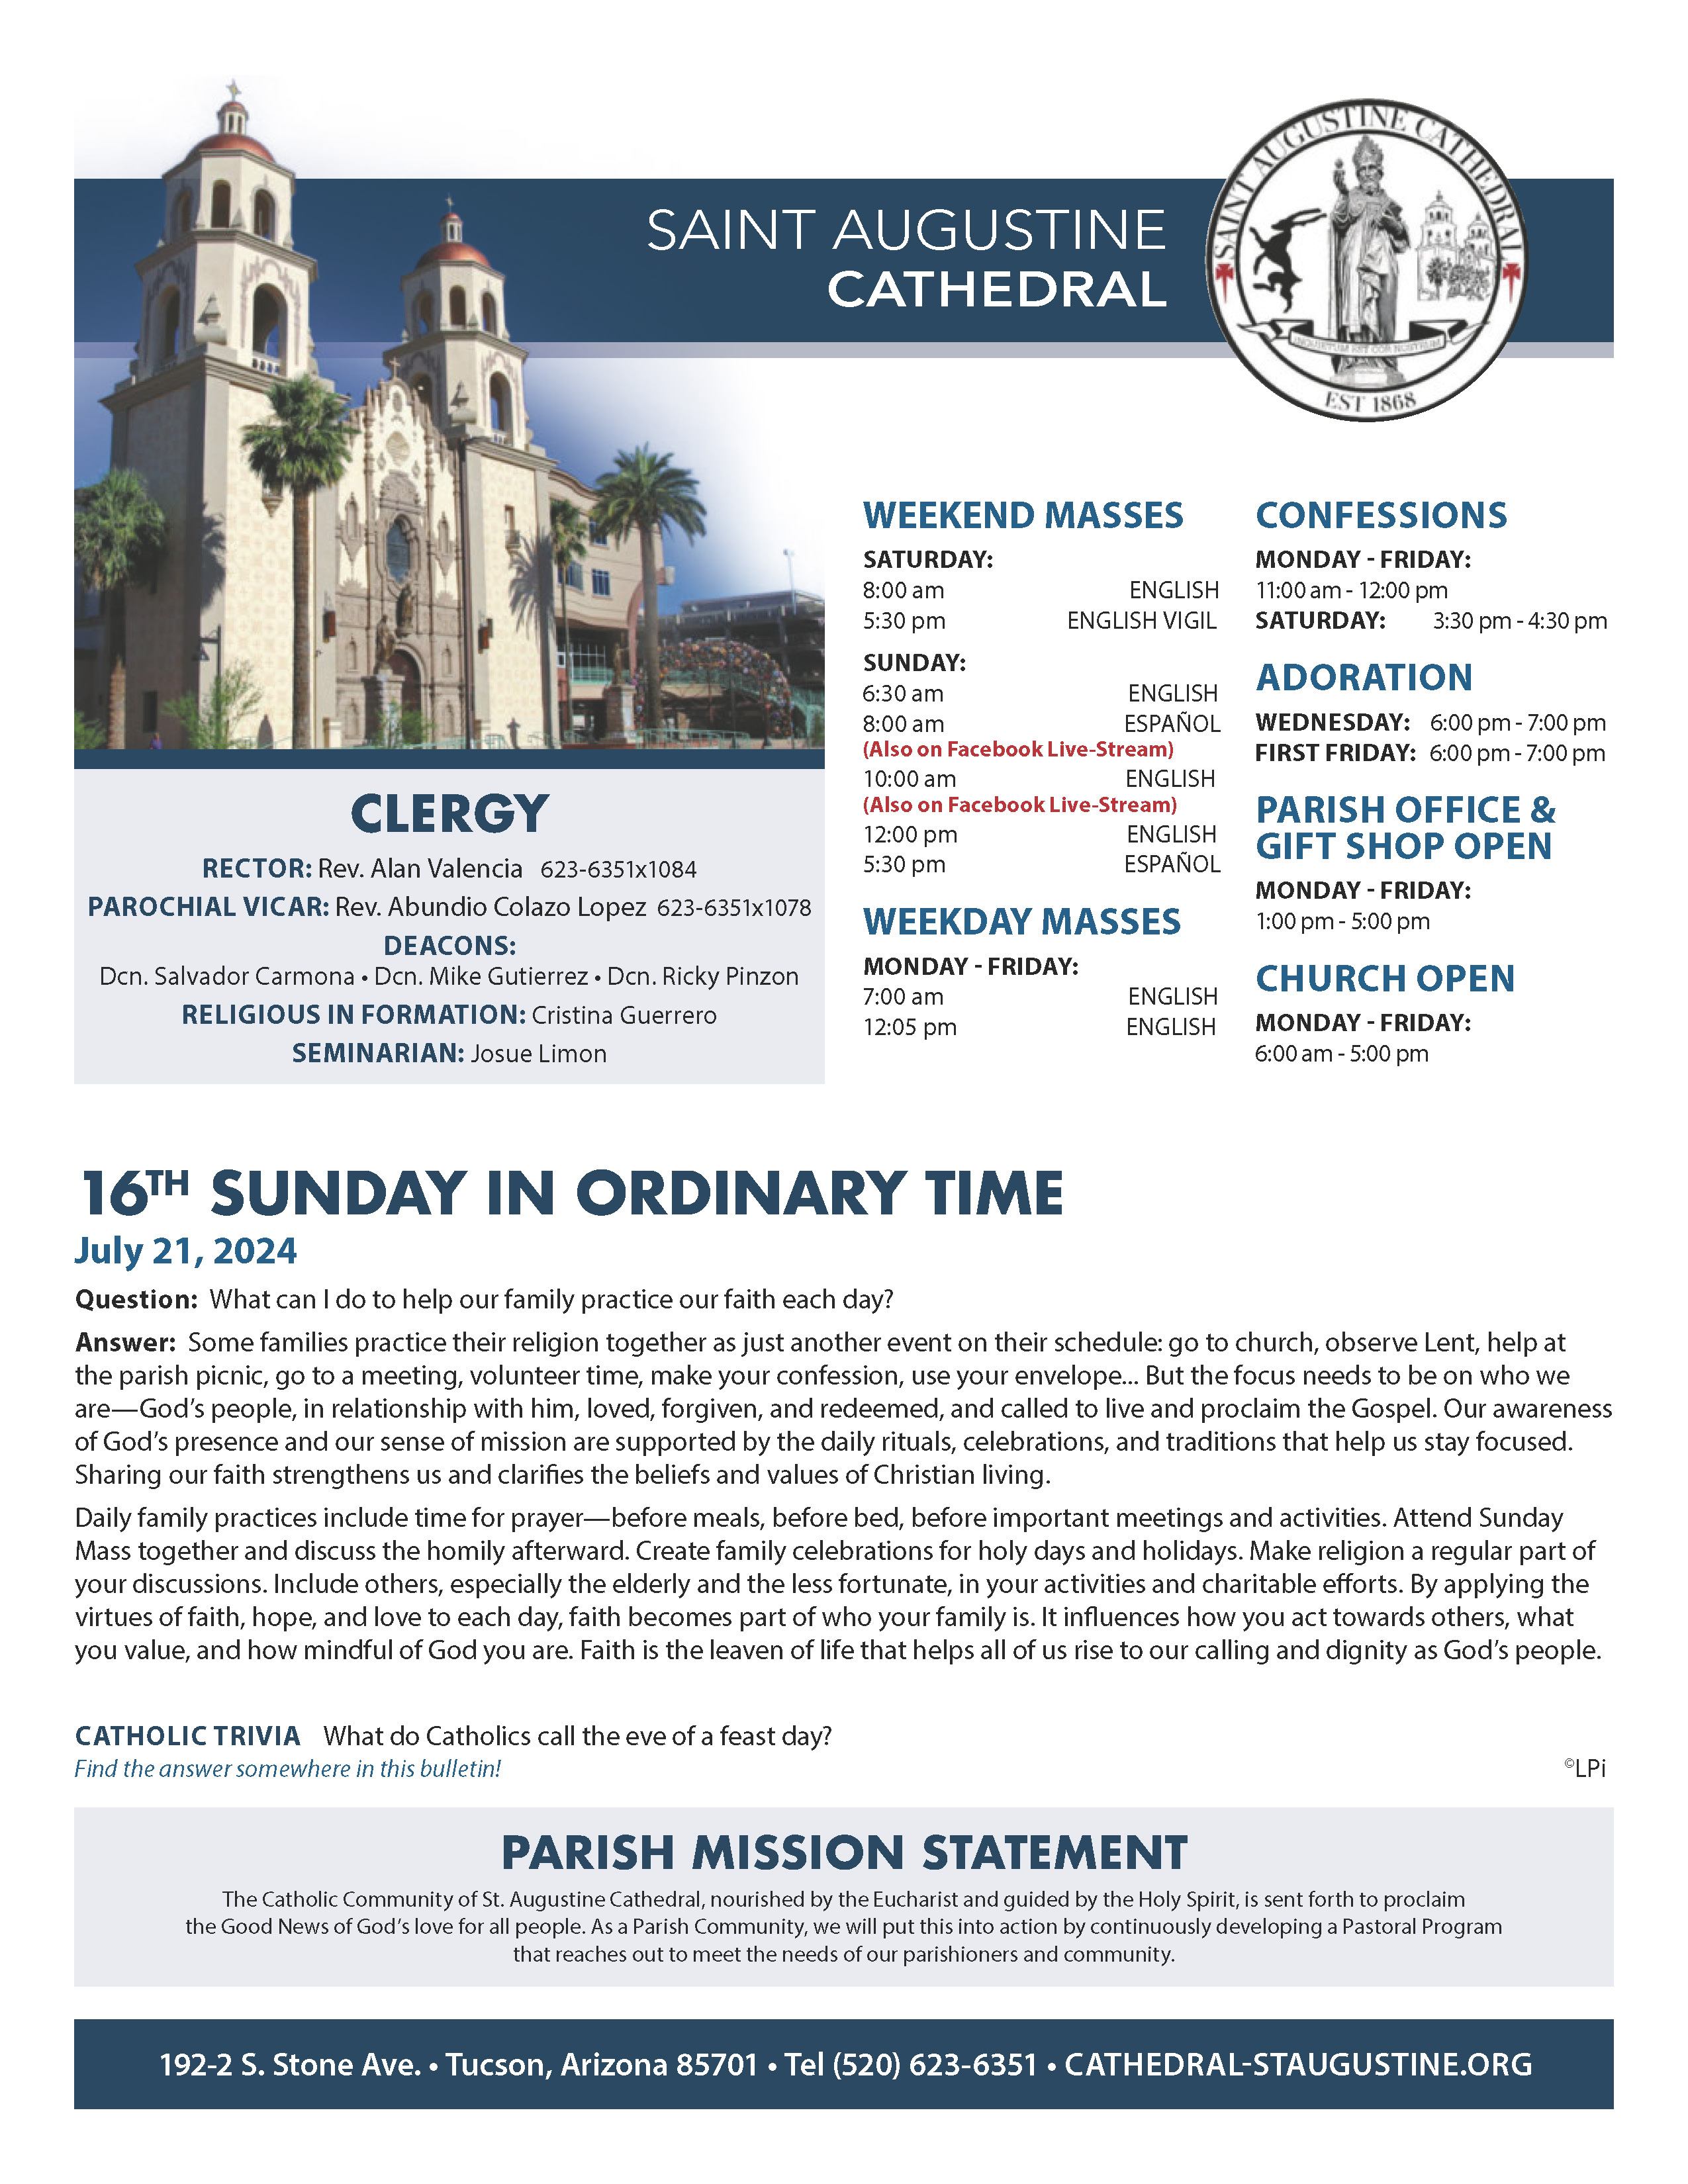 St. Augustine Cathedral Tucson Bulletin page 1